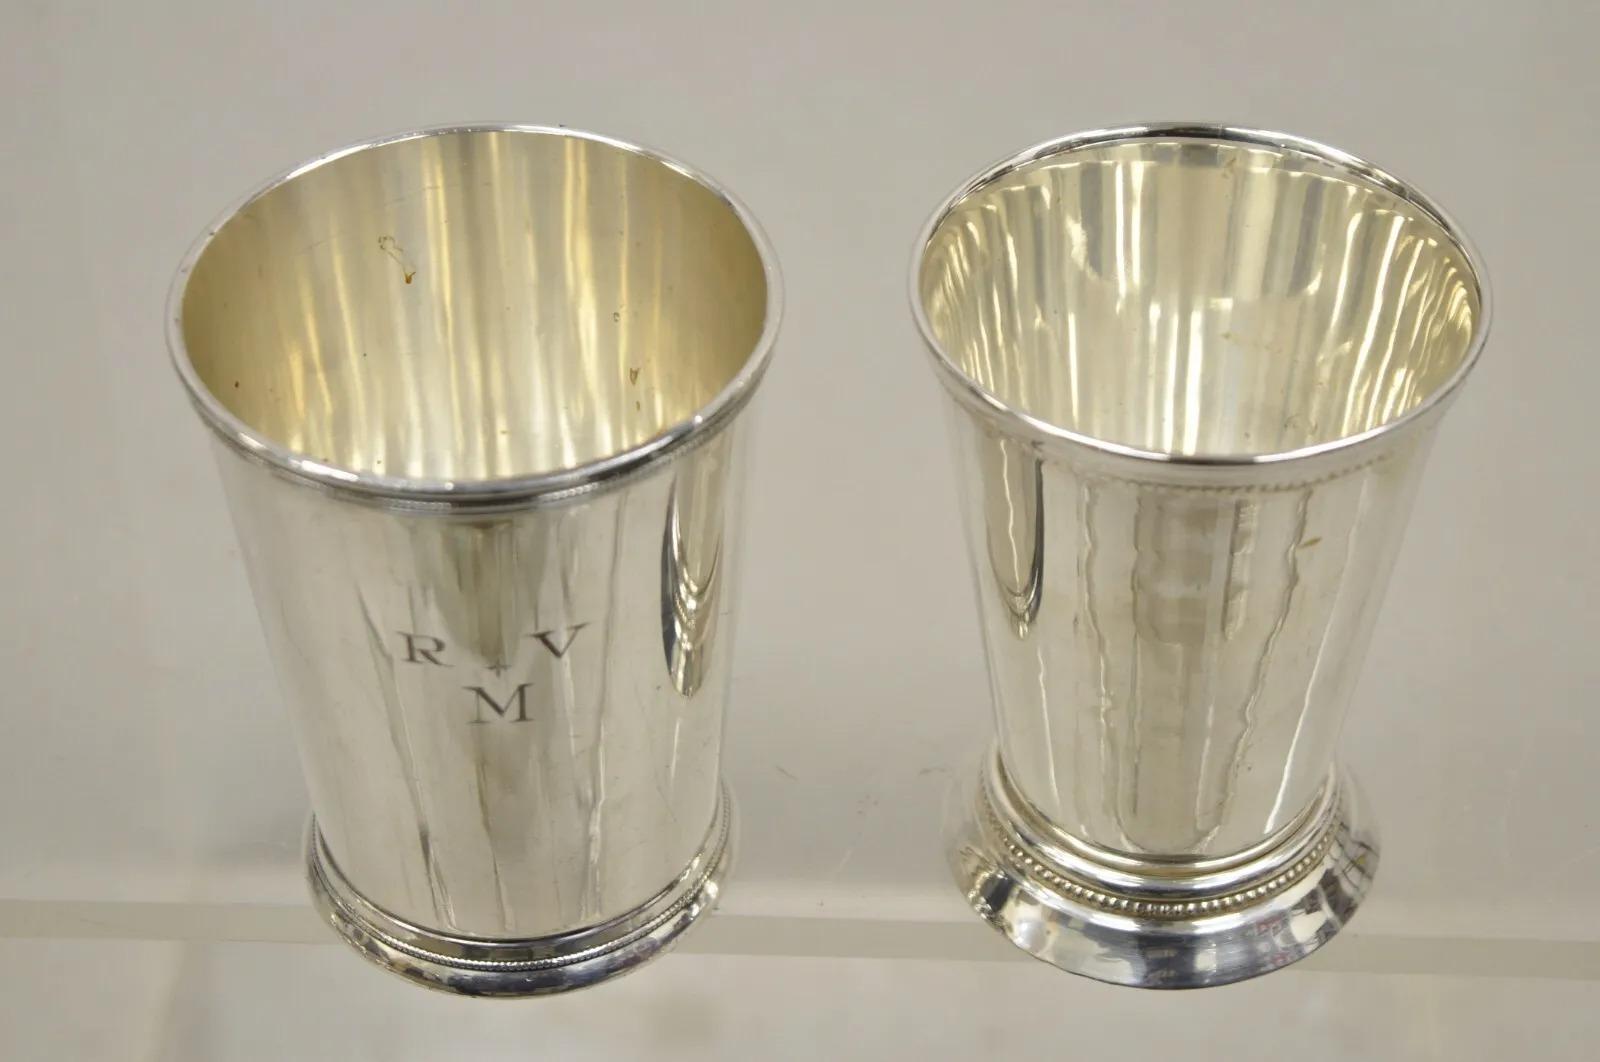 2 Vintage Silver Plated Mint Julep Cups Tumblers 1 with Monogram - 2 Pieces For Sale 5